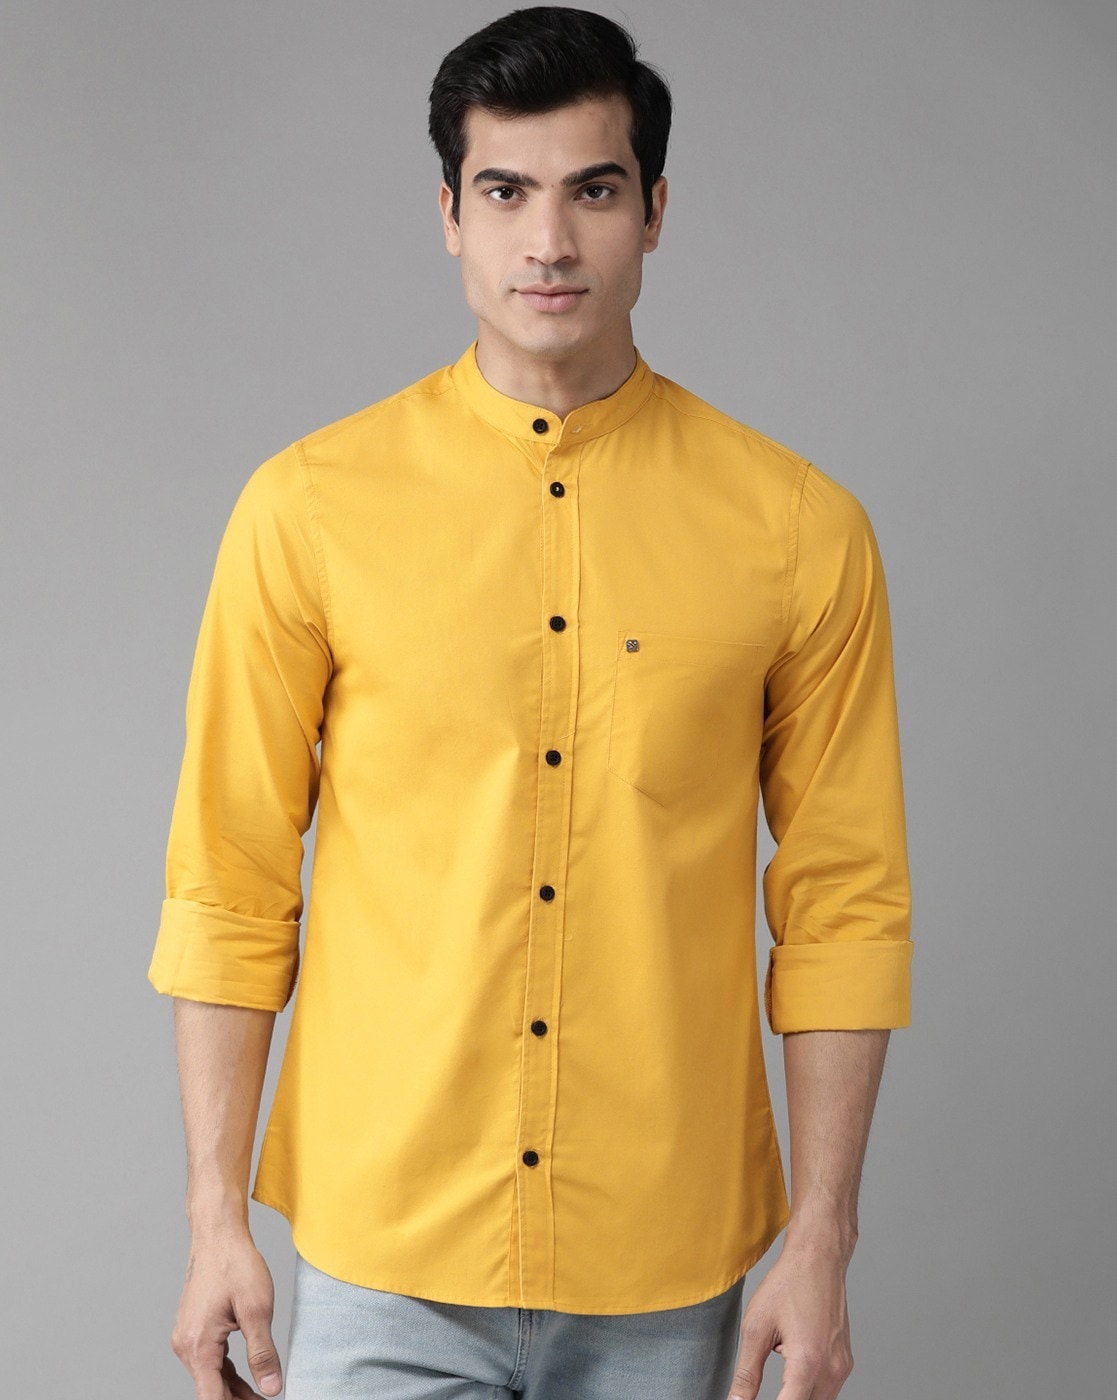 Buy Yellow Shirts for Men by Hubberholme Online